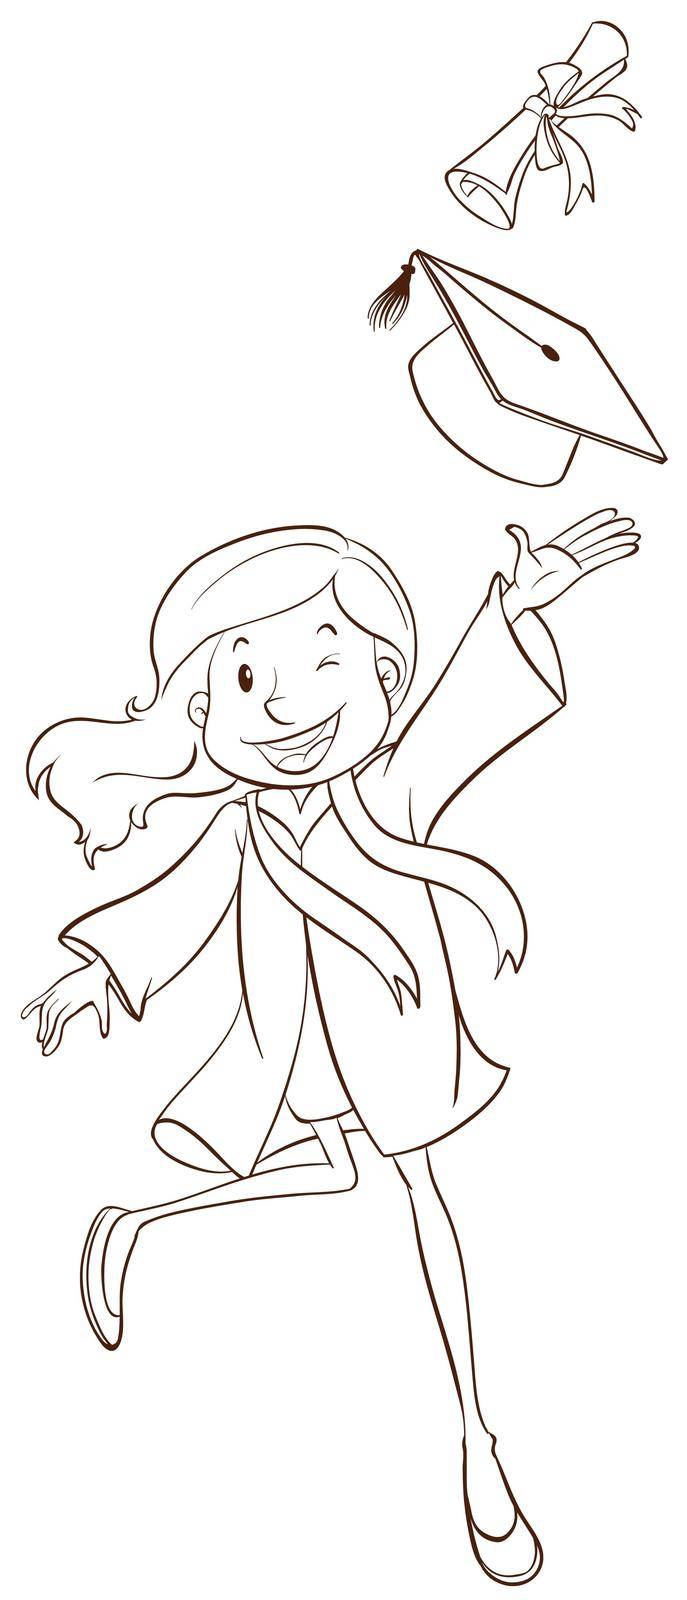 A simple sketch of a girl graduating by iimages